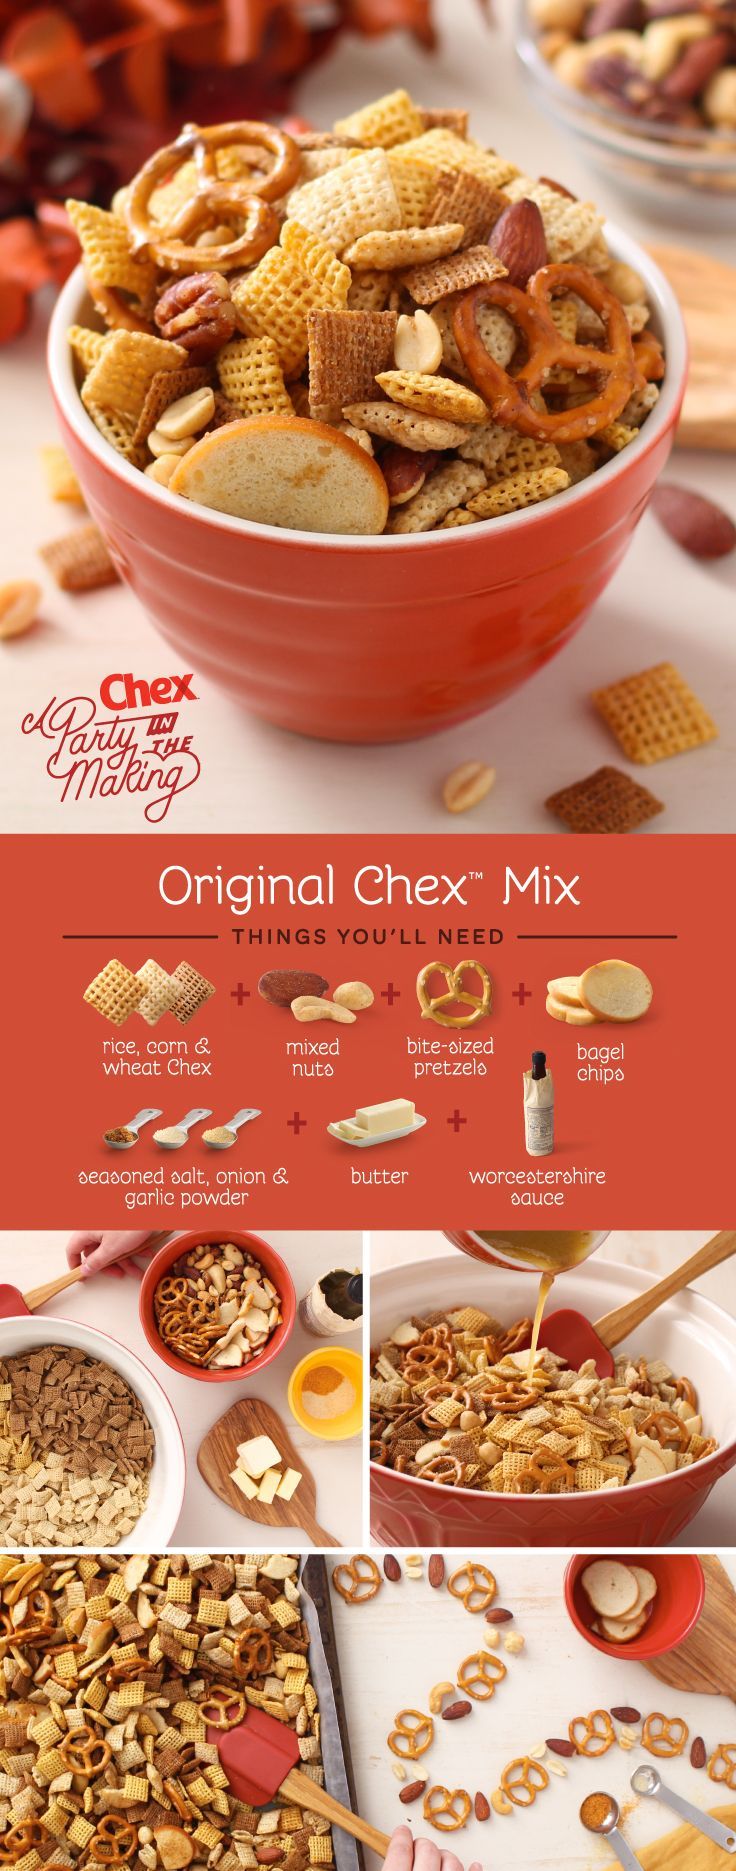 It’s celebration time, and this recipe feeds a crowd! Homemade Original Chex Mix